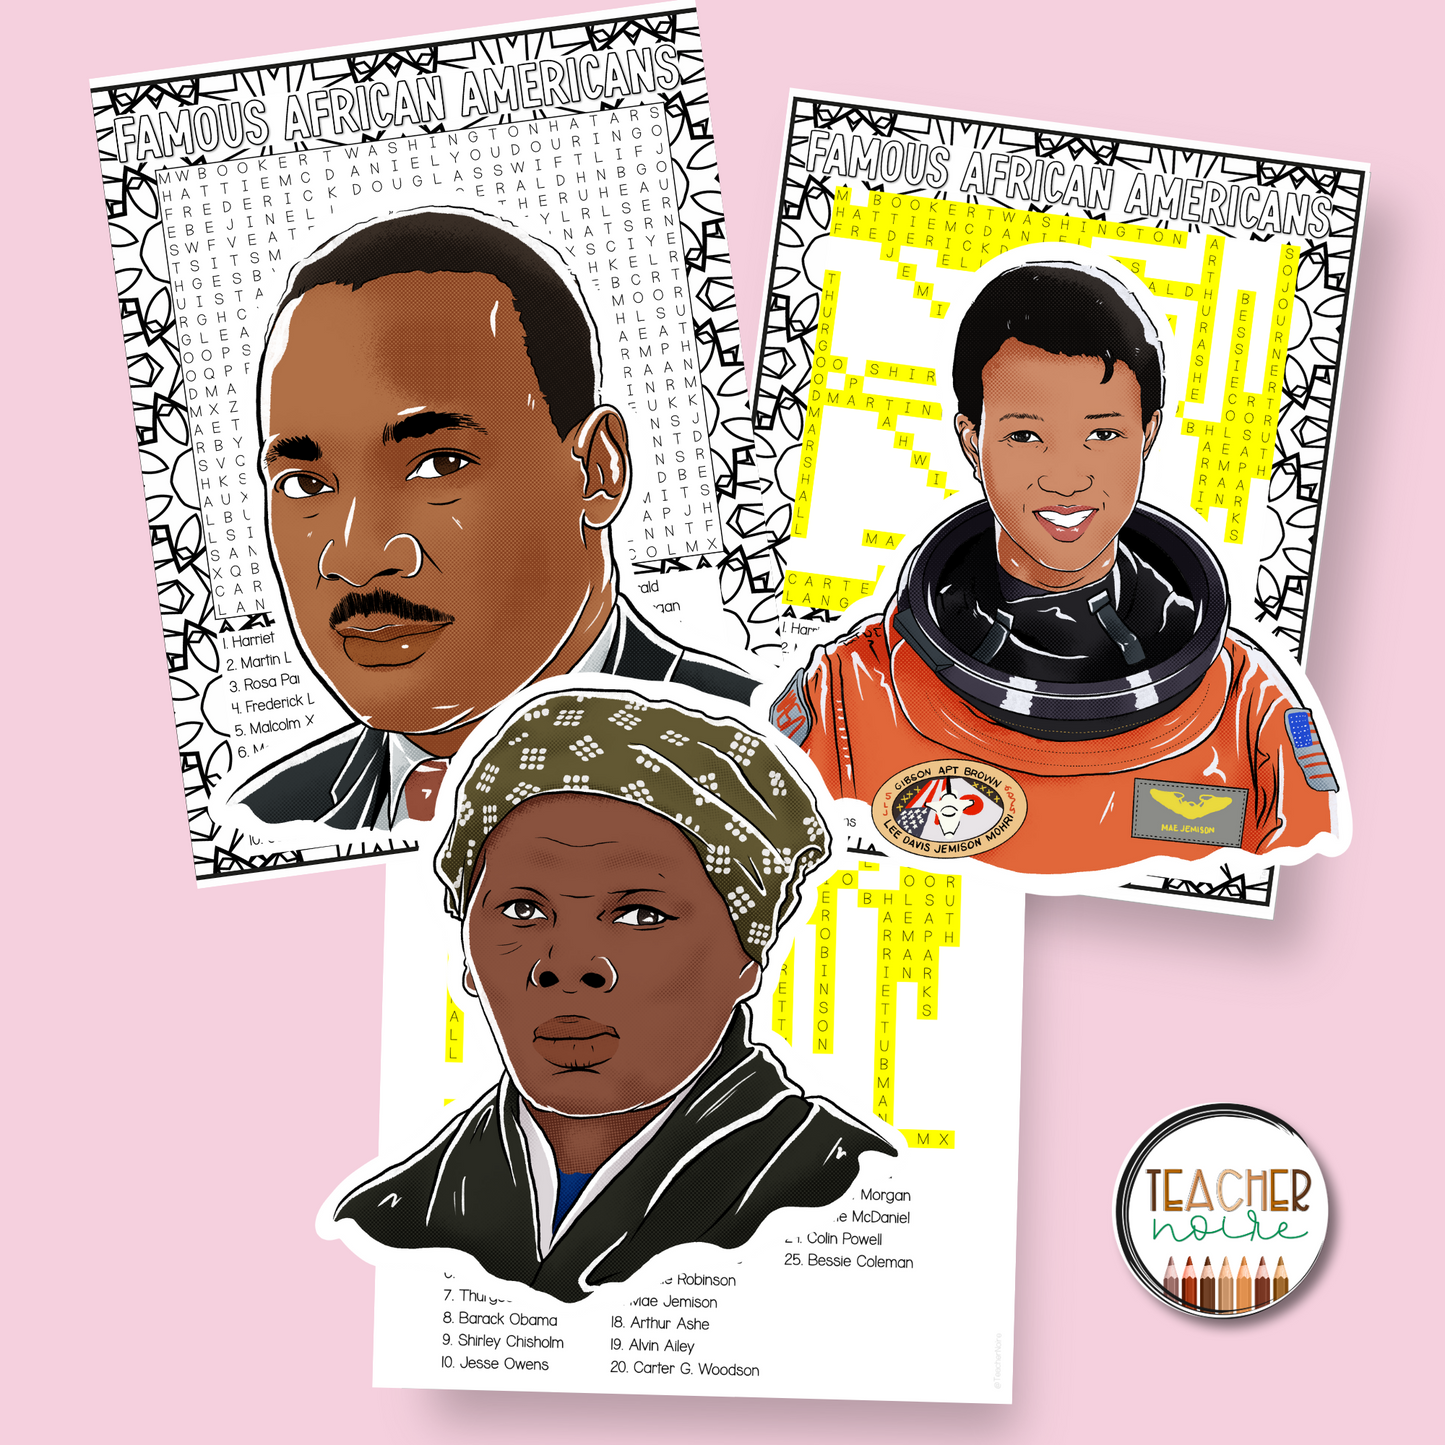 Black History Month Word Search Puzzle